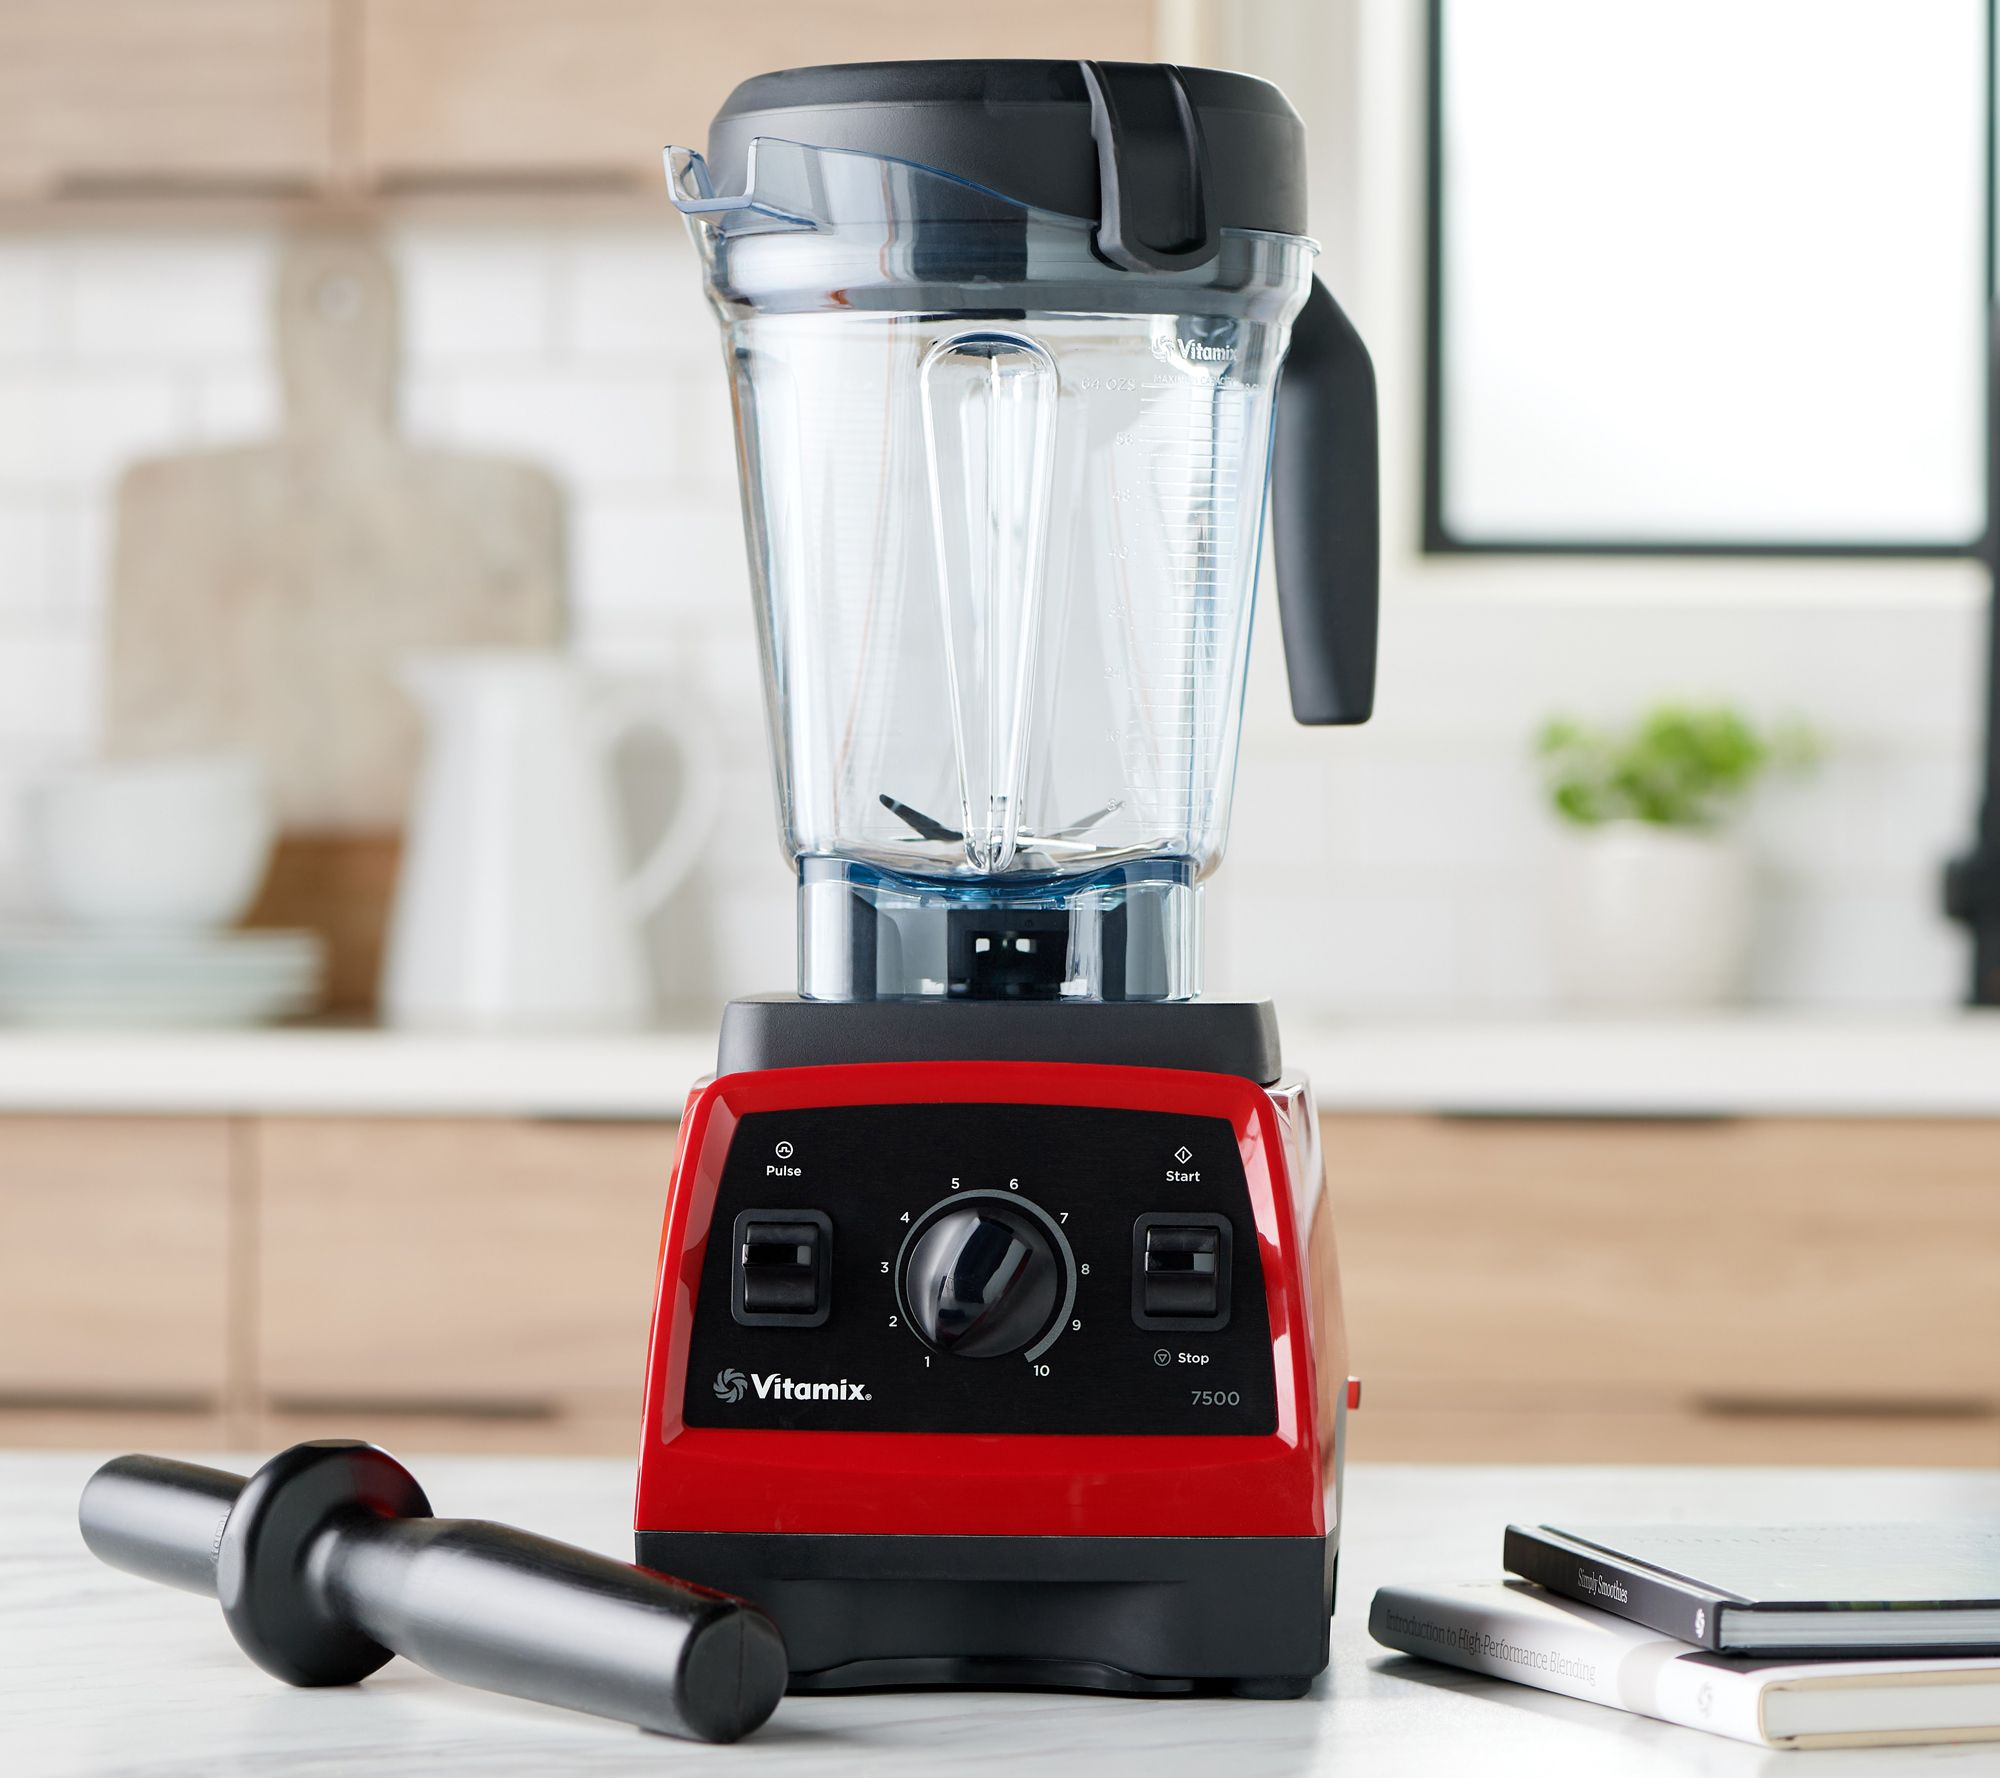 Vitamix 7500 13-in-1 Variable Speed Blender with 64 oz Container & Cookbook (Various colors) $299.98